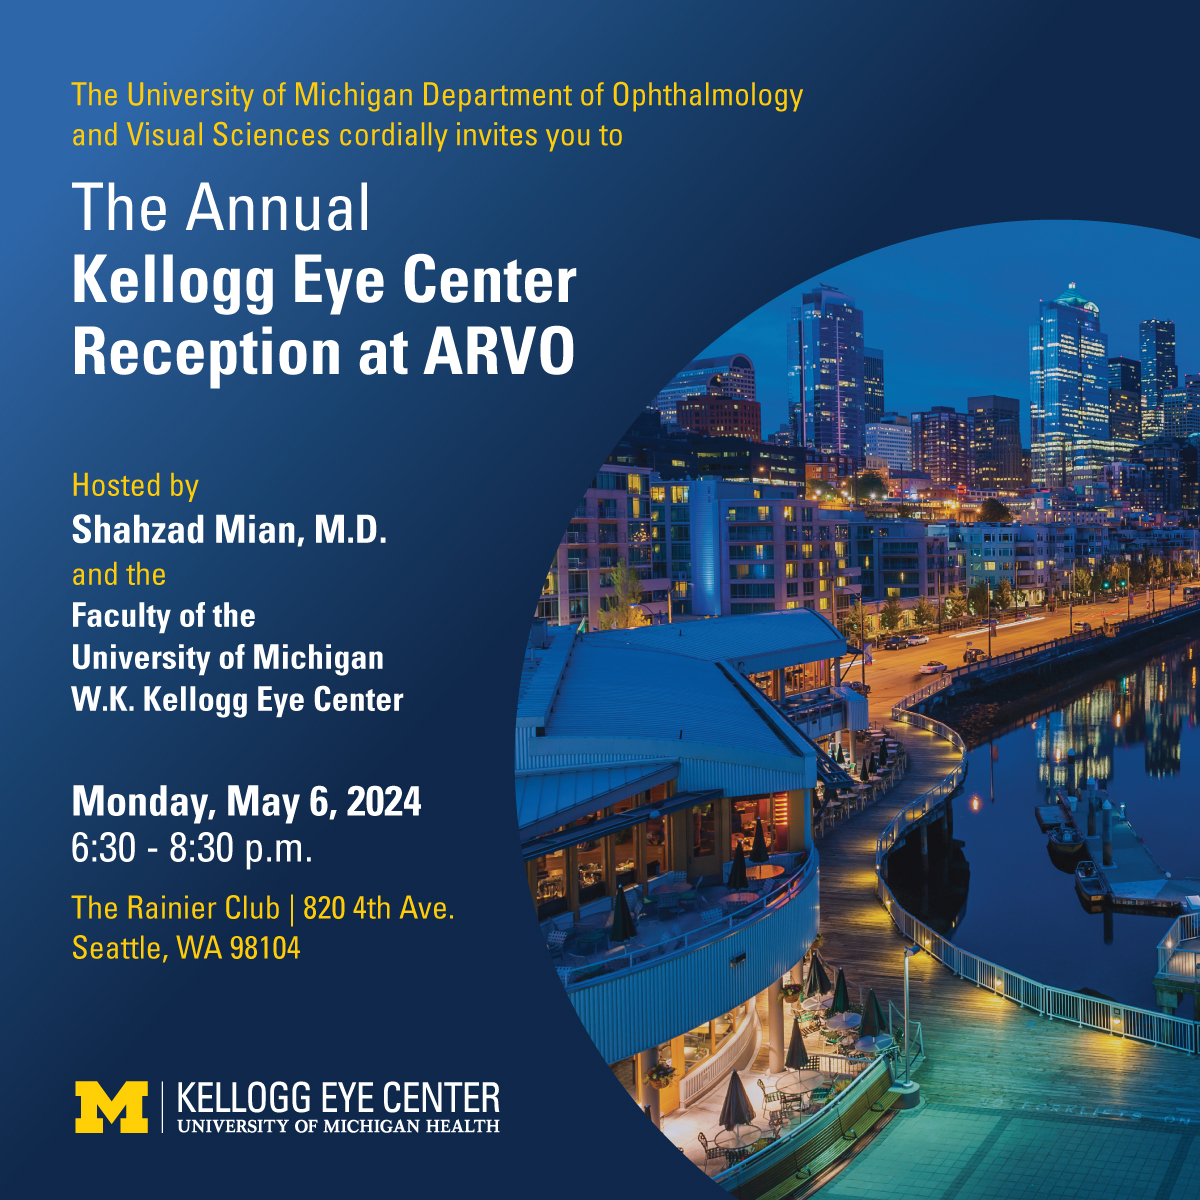 One week left to RSVP for our annual reception at ARVO! docs.google.com/forms/d/1N6DpH…